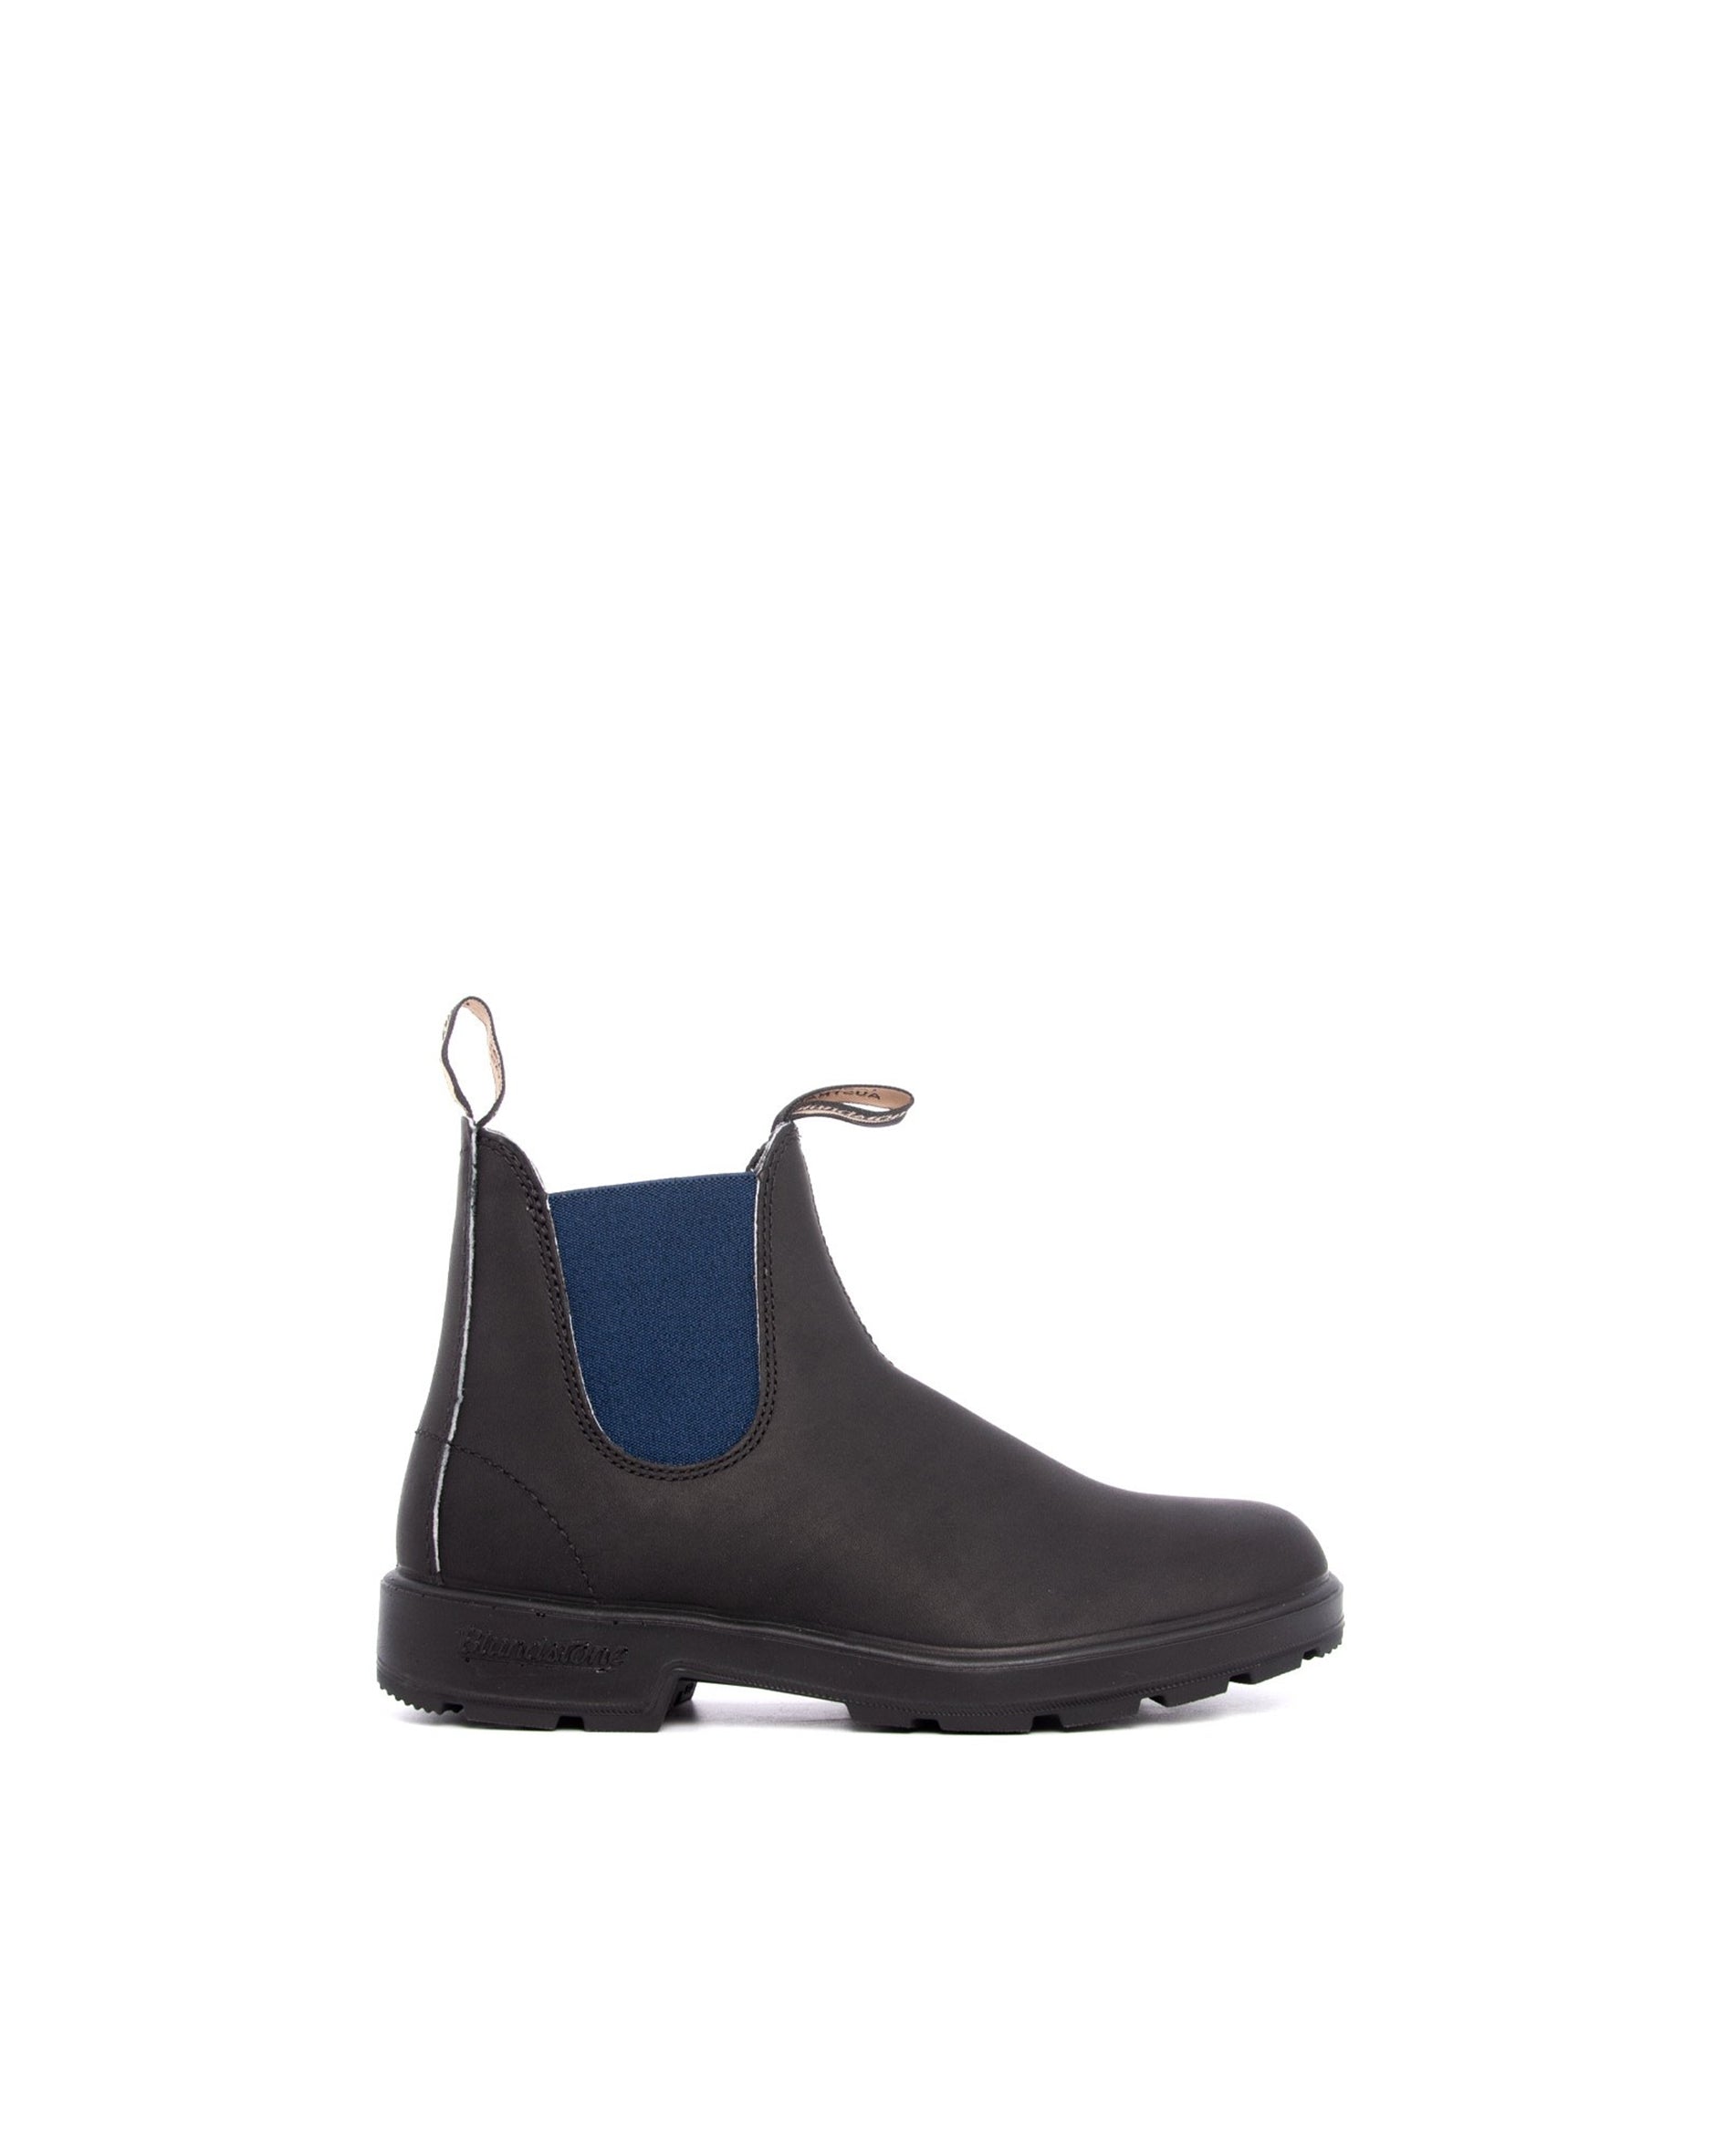 1917 Black/Navy Leather Boots